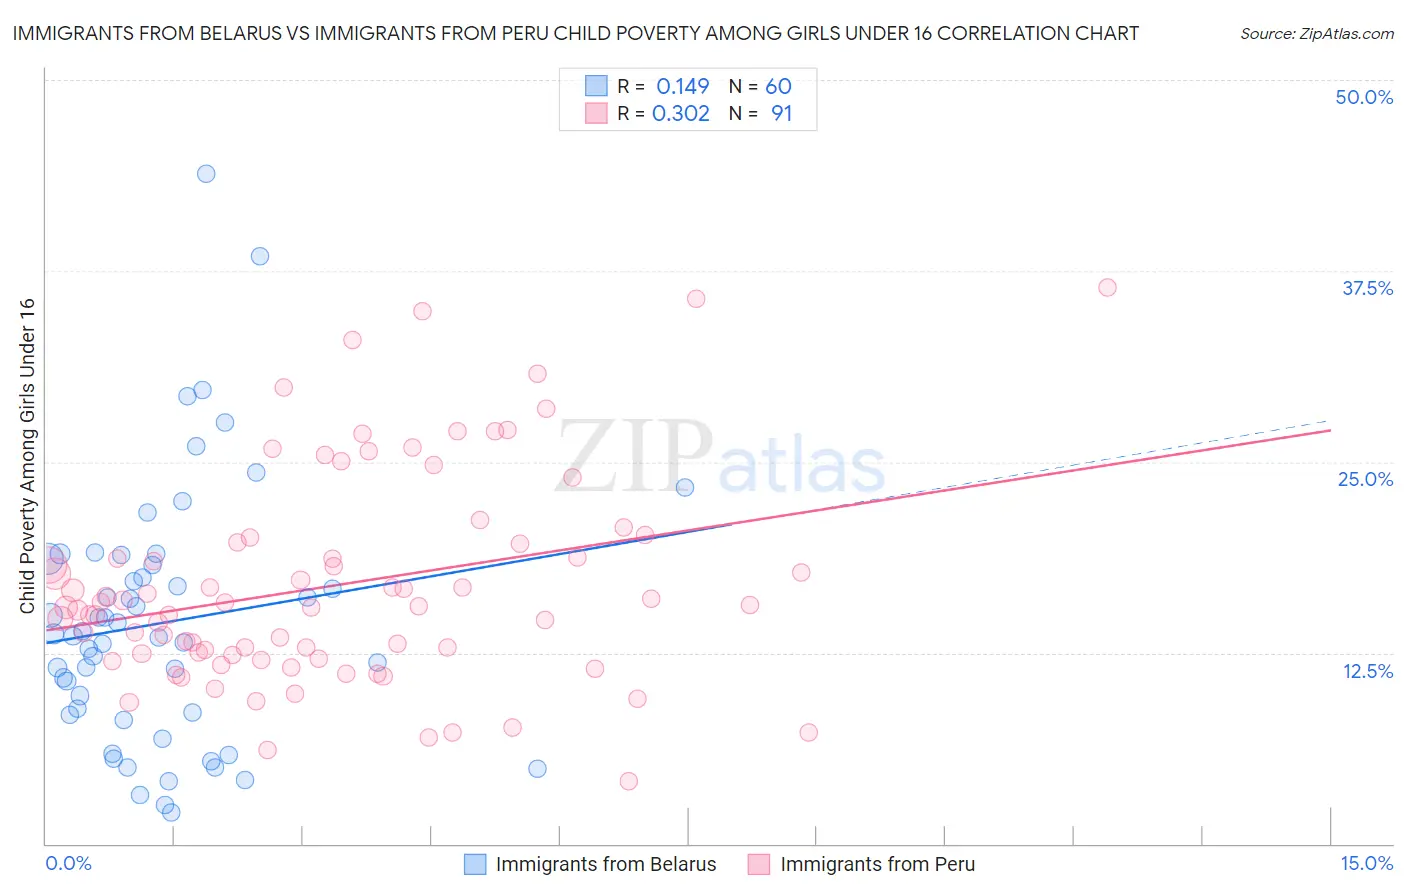 Immigrants from Belarus vs Immigrants from Peru Child Poverty Among Girls Under 16